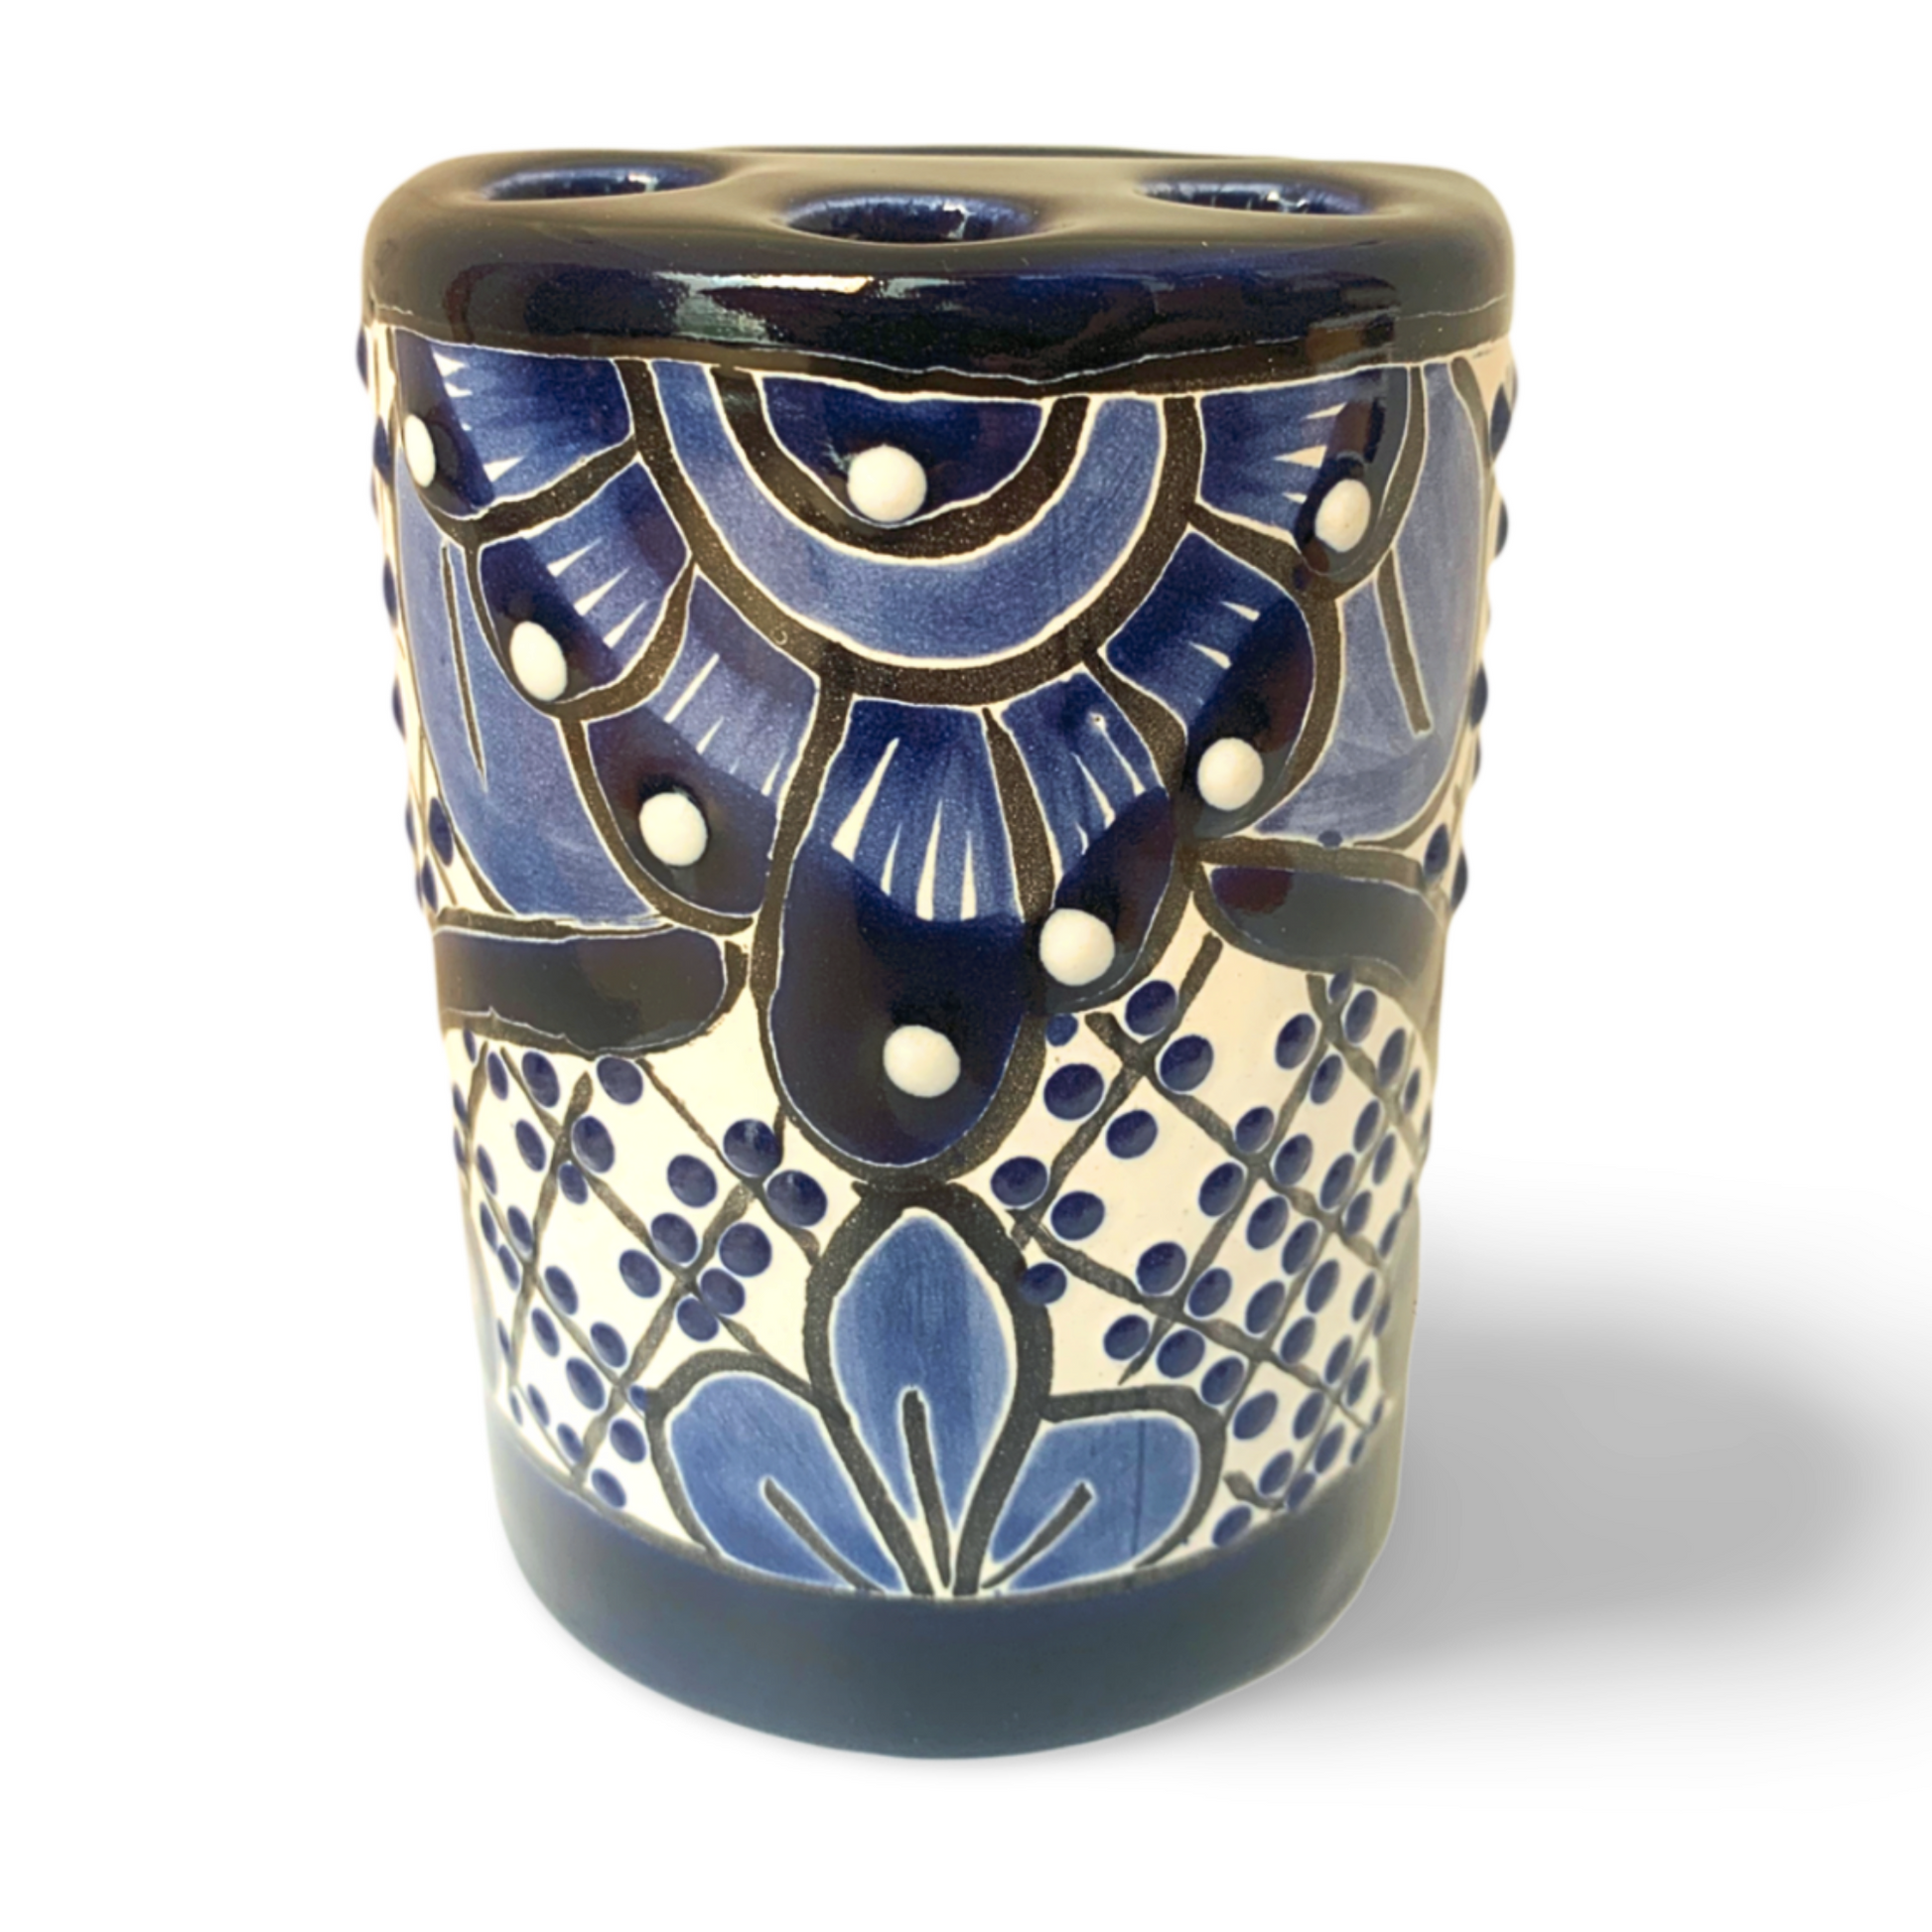 main image of Hand-painted Talavera Toothbrush Holder by Casa Fiesta Designs, offers compact storage and adds charm to your bathroom.